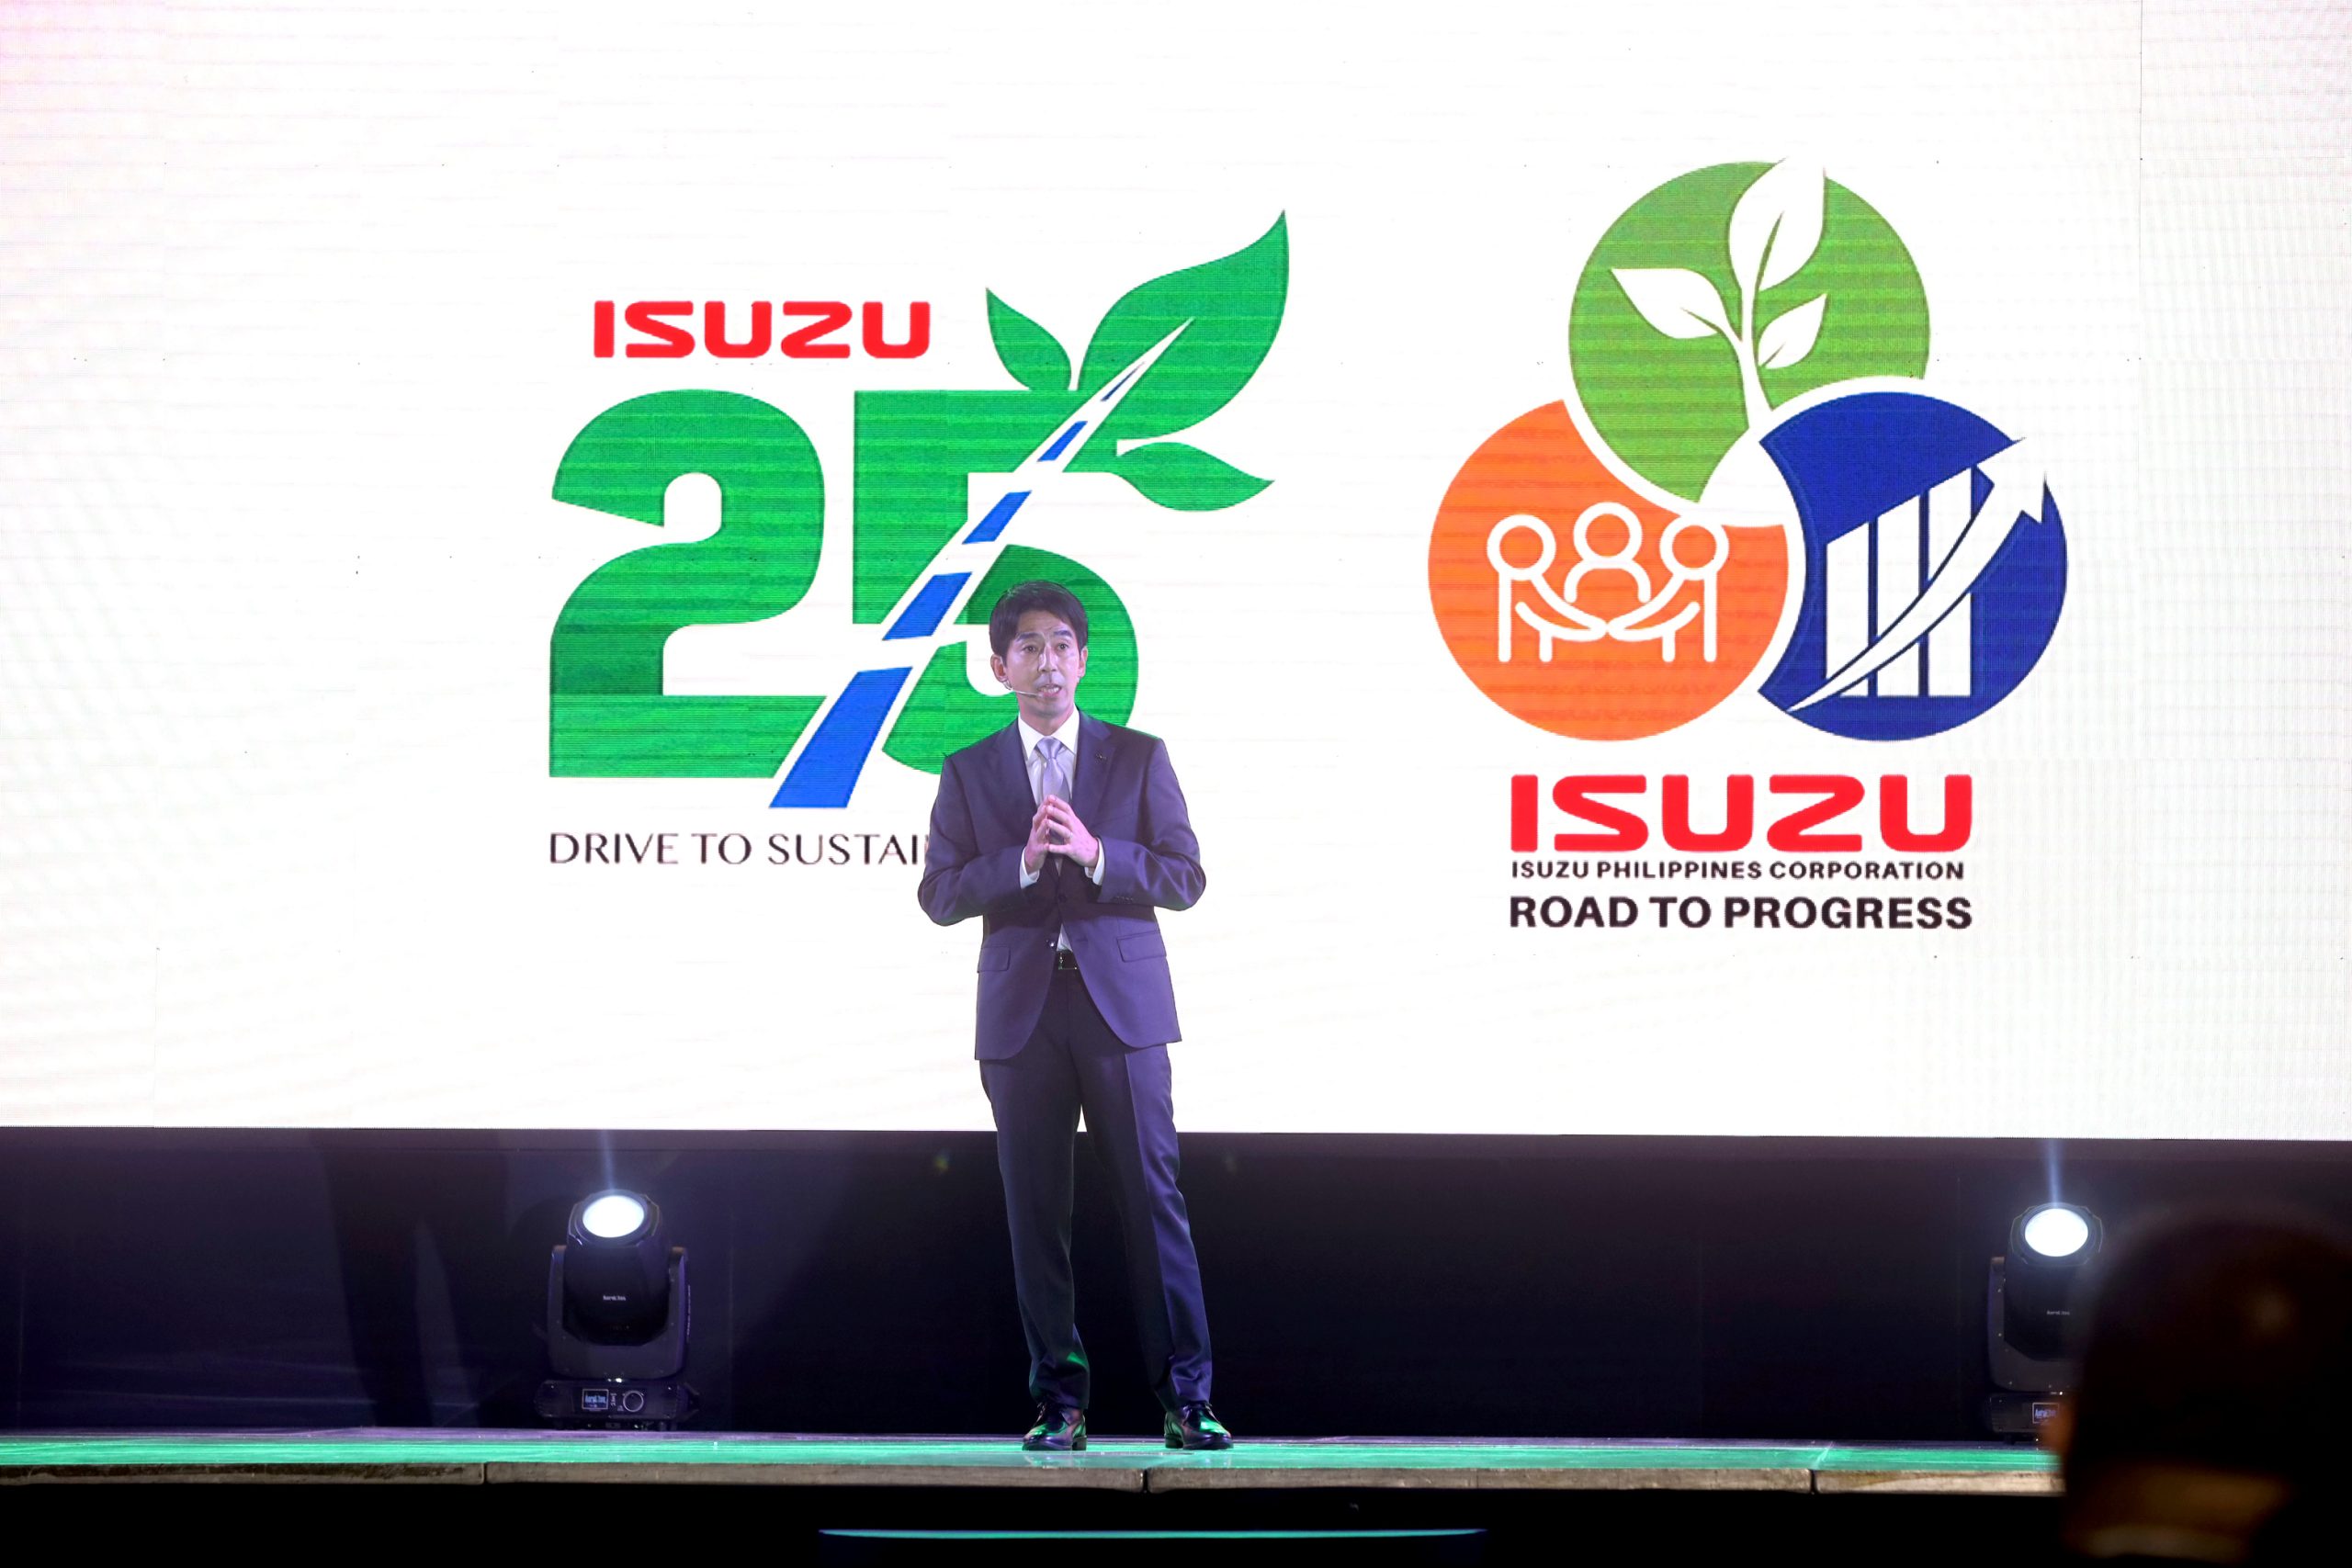 Isuzu Philippines launches “Road To Progress” vision during 25th anniversary